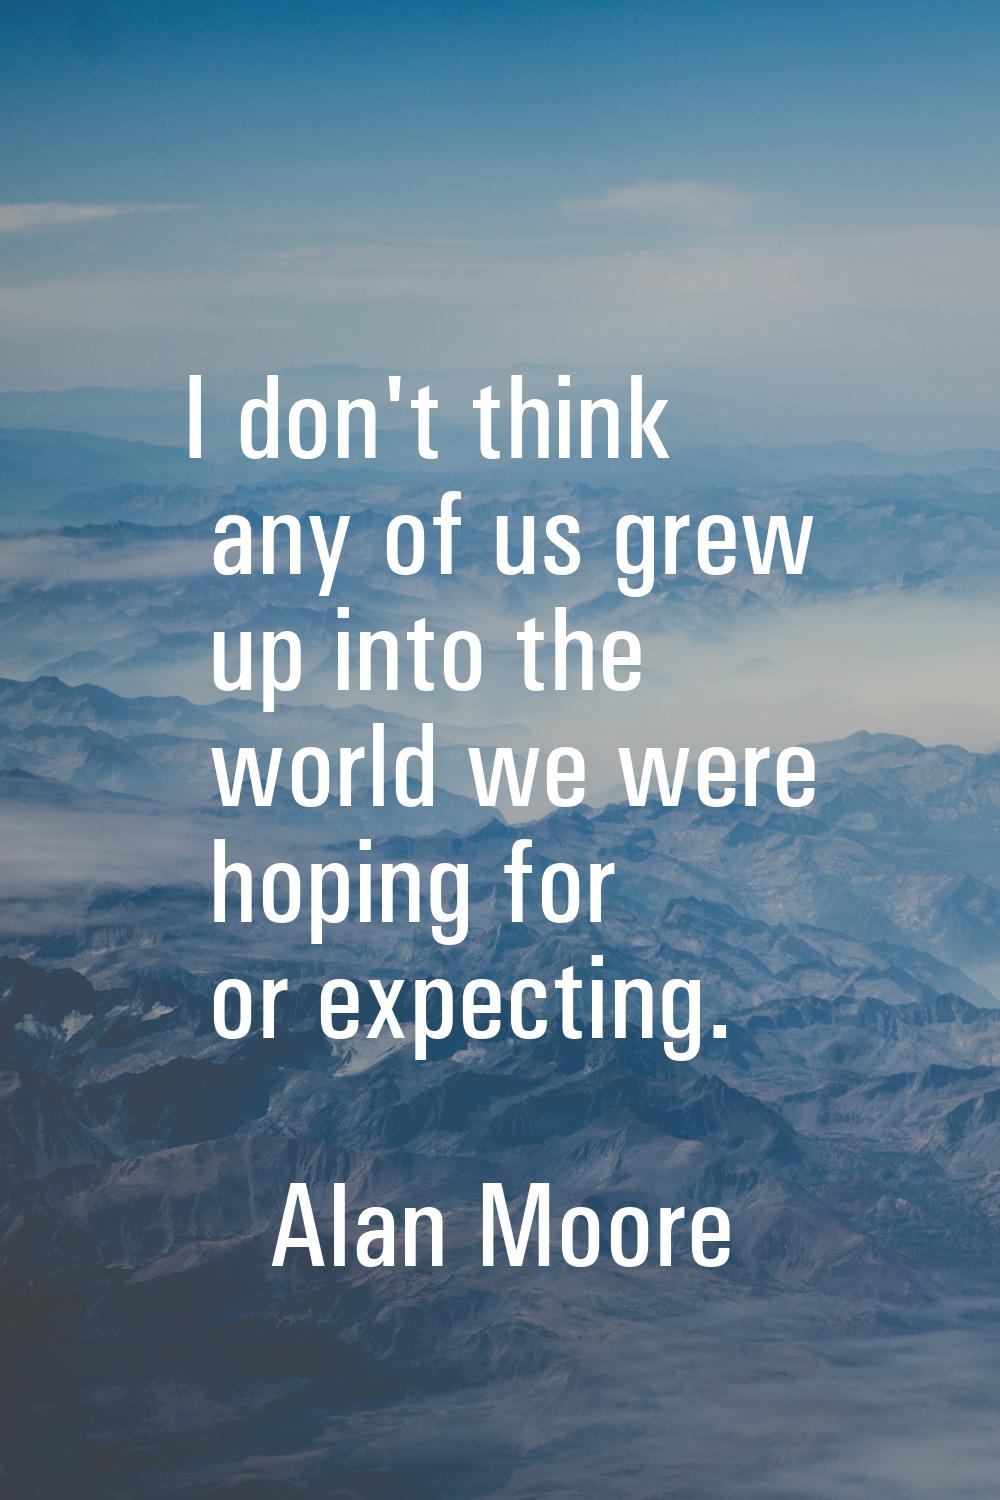 I don't think any of us grew up into the world we were hoping for or expecting.